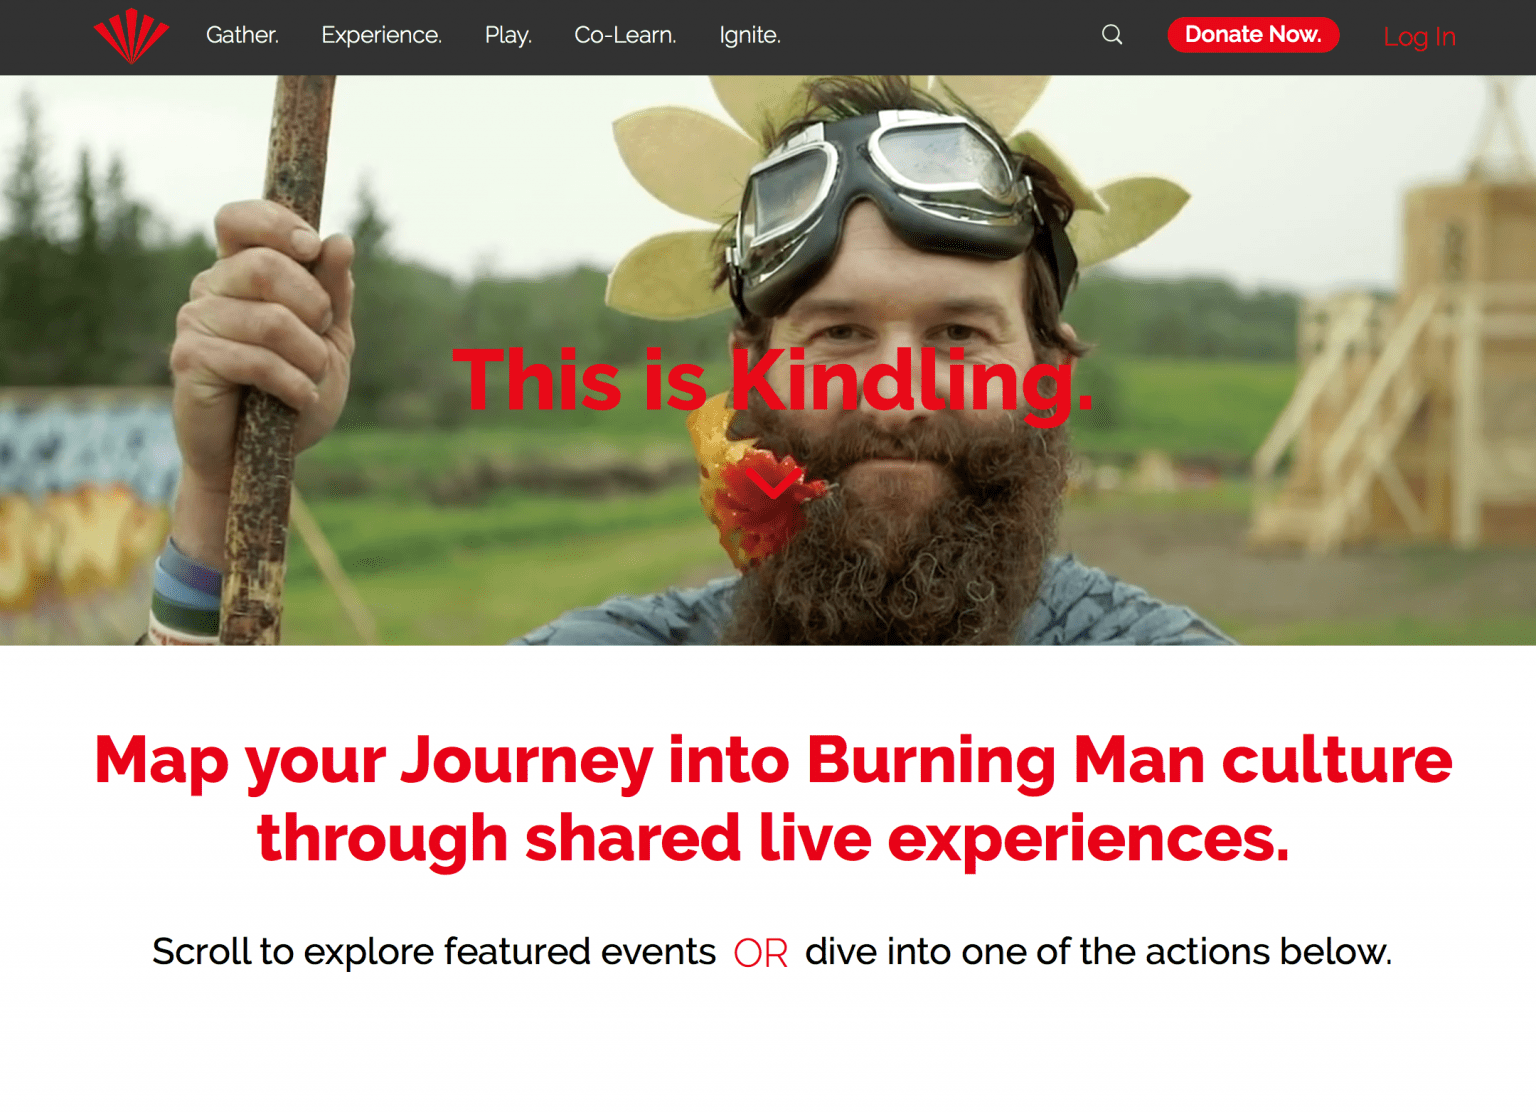 Kindling logo and branding for the Burning Man project